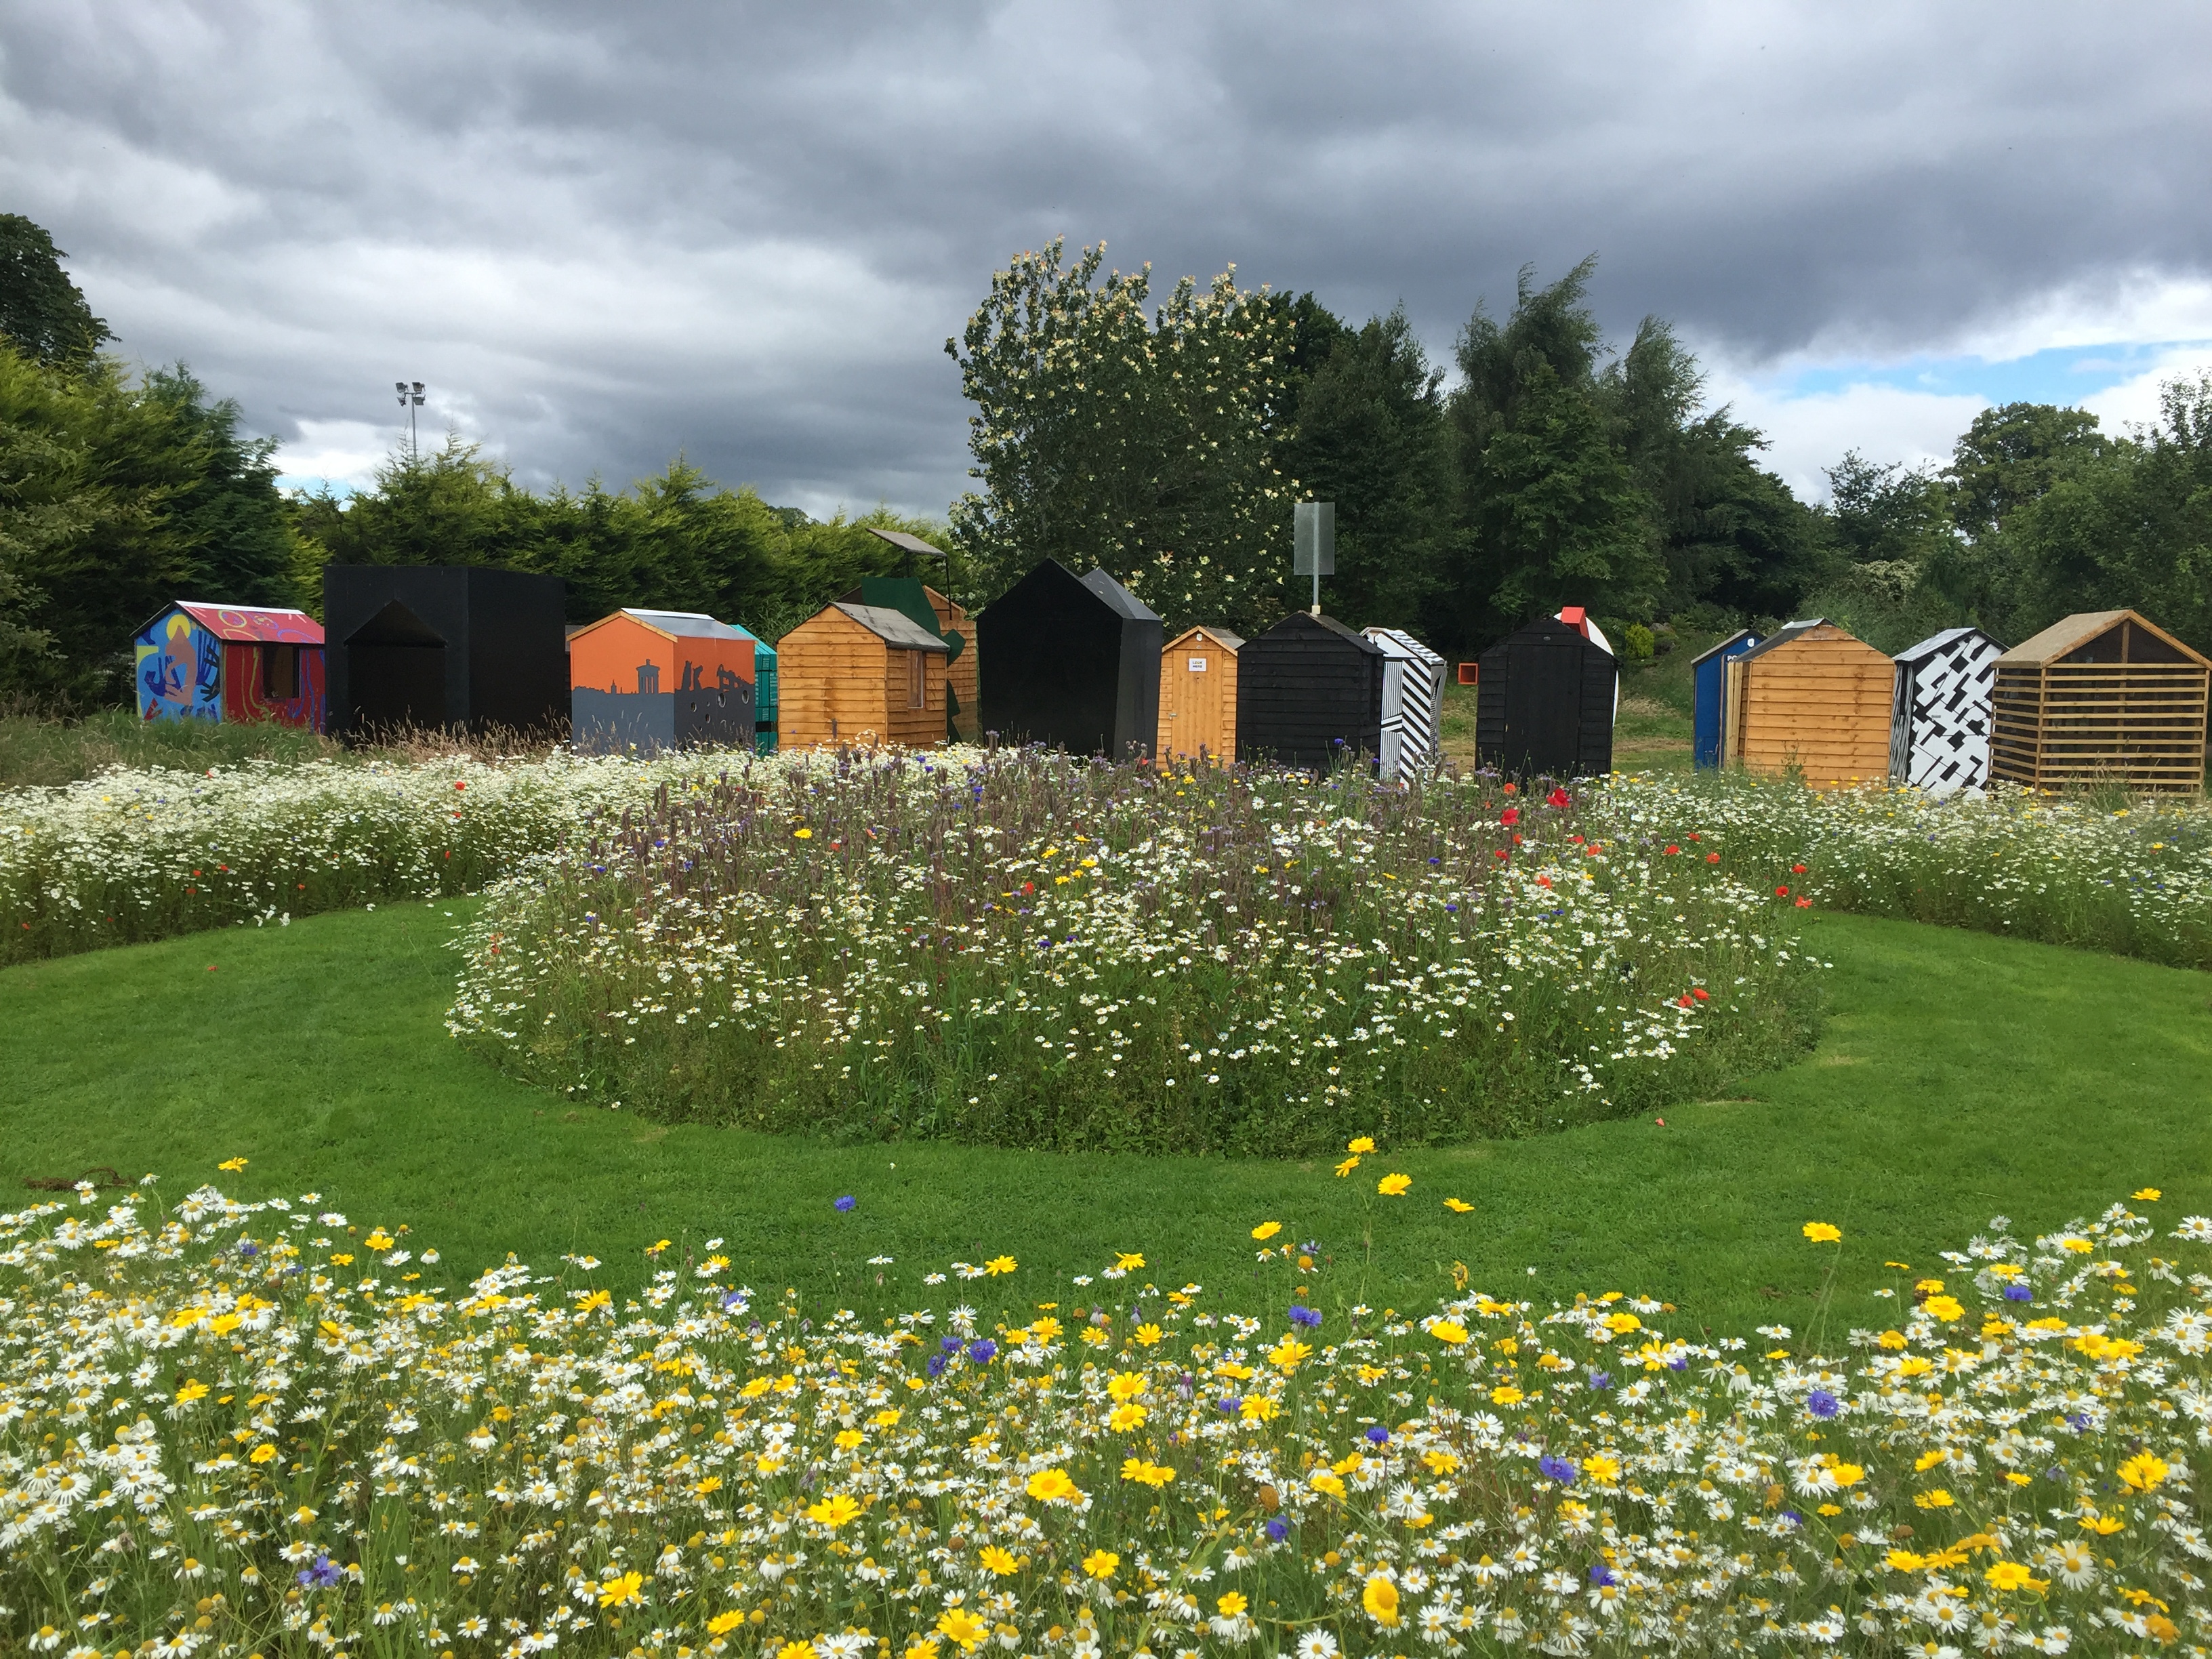 The Ideal Hut Show sheds in Inverness Botanics...with the far mot=re impressive wild flower meadow in the foreground.